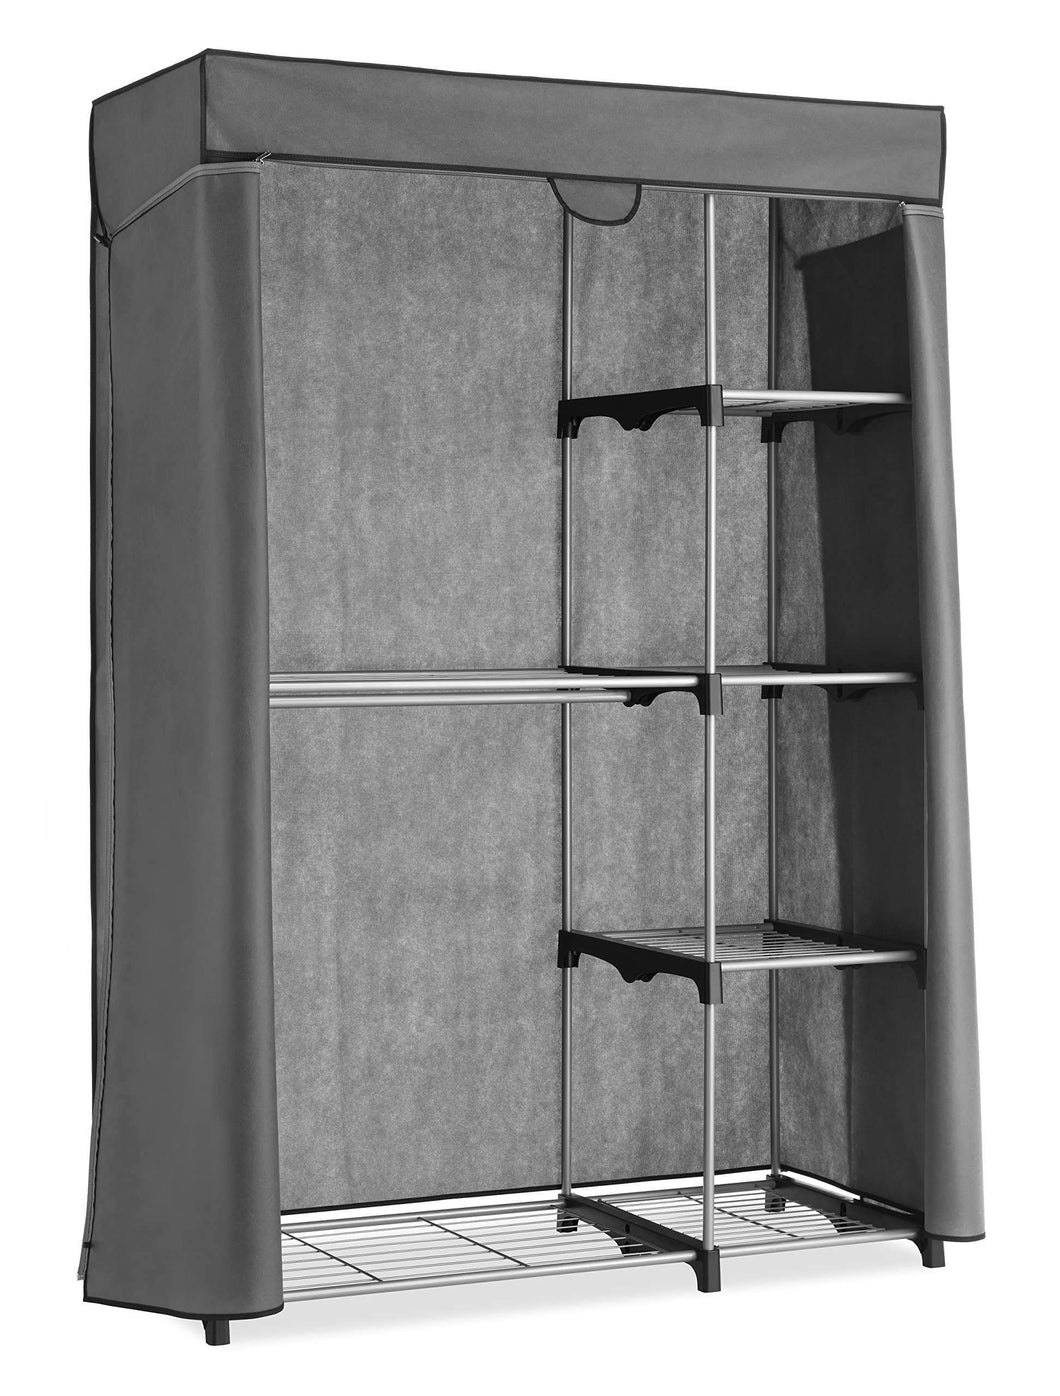 Related whitmor deluxe utility closet 5 extra strong shelves removable cover